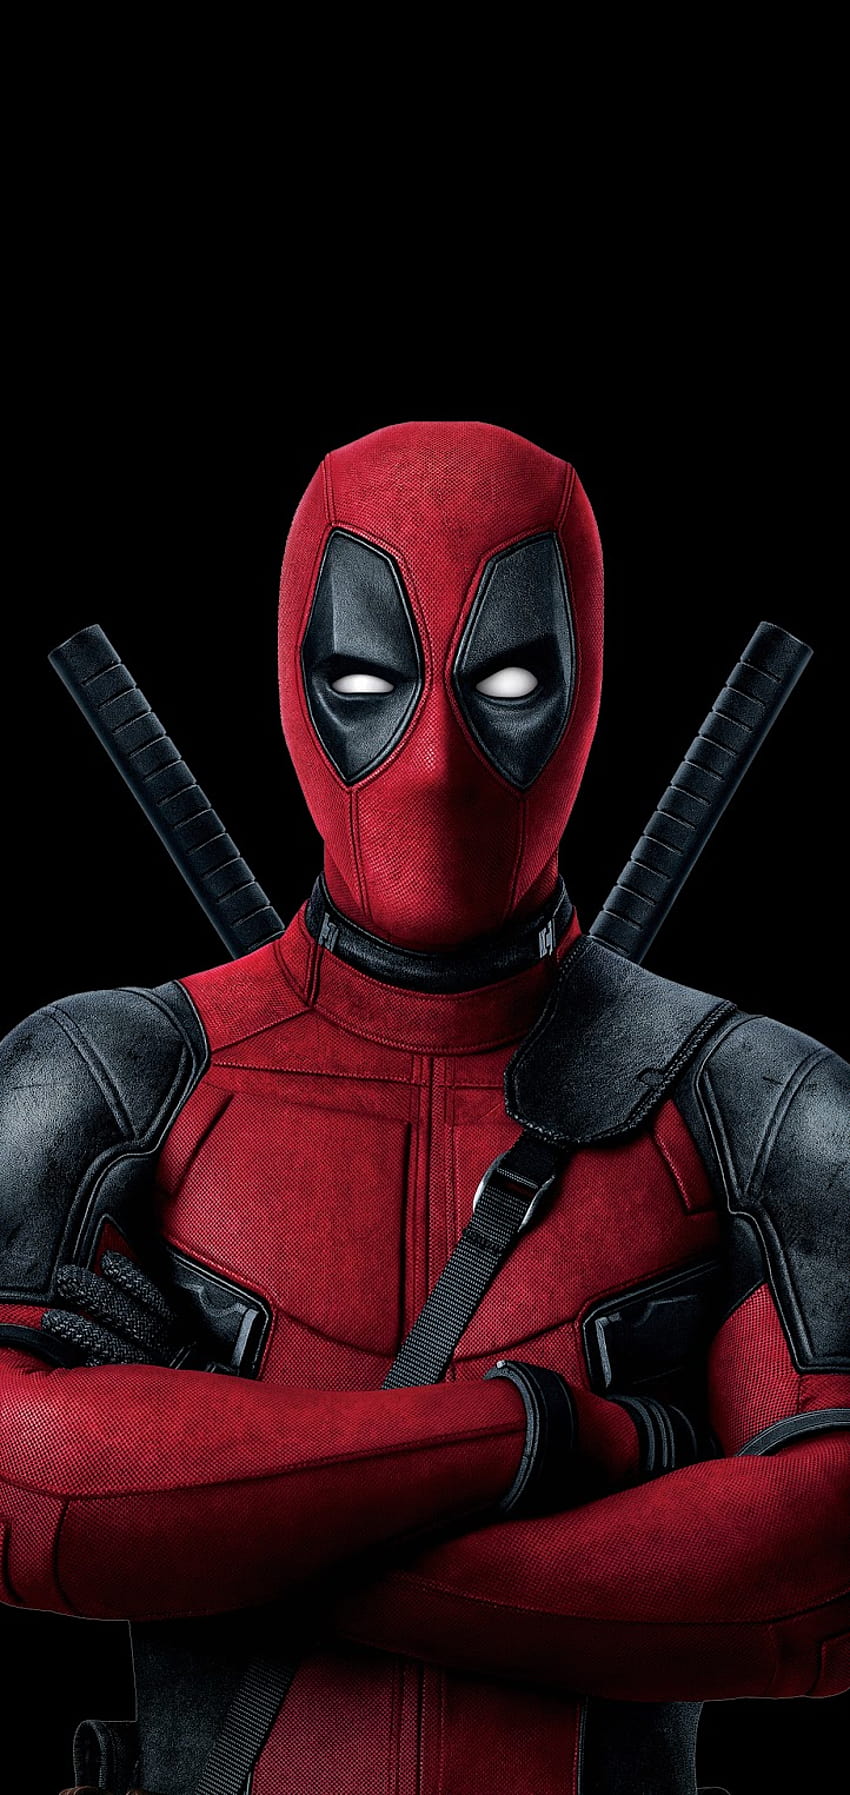 Deadpool 4K Wallpaper for phones by Sam Wallpapers link in the comment  section Enjoy Deadpool fans  rdeadpool